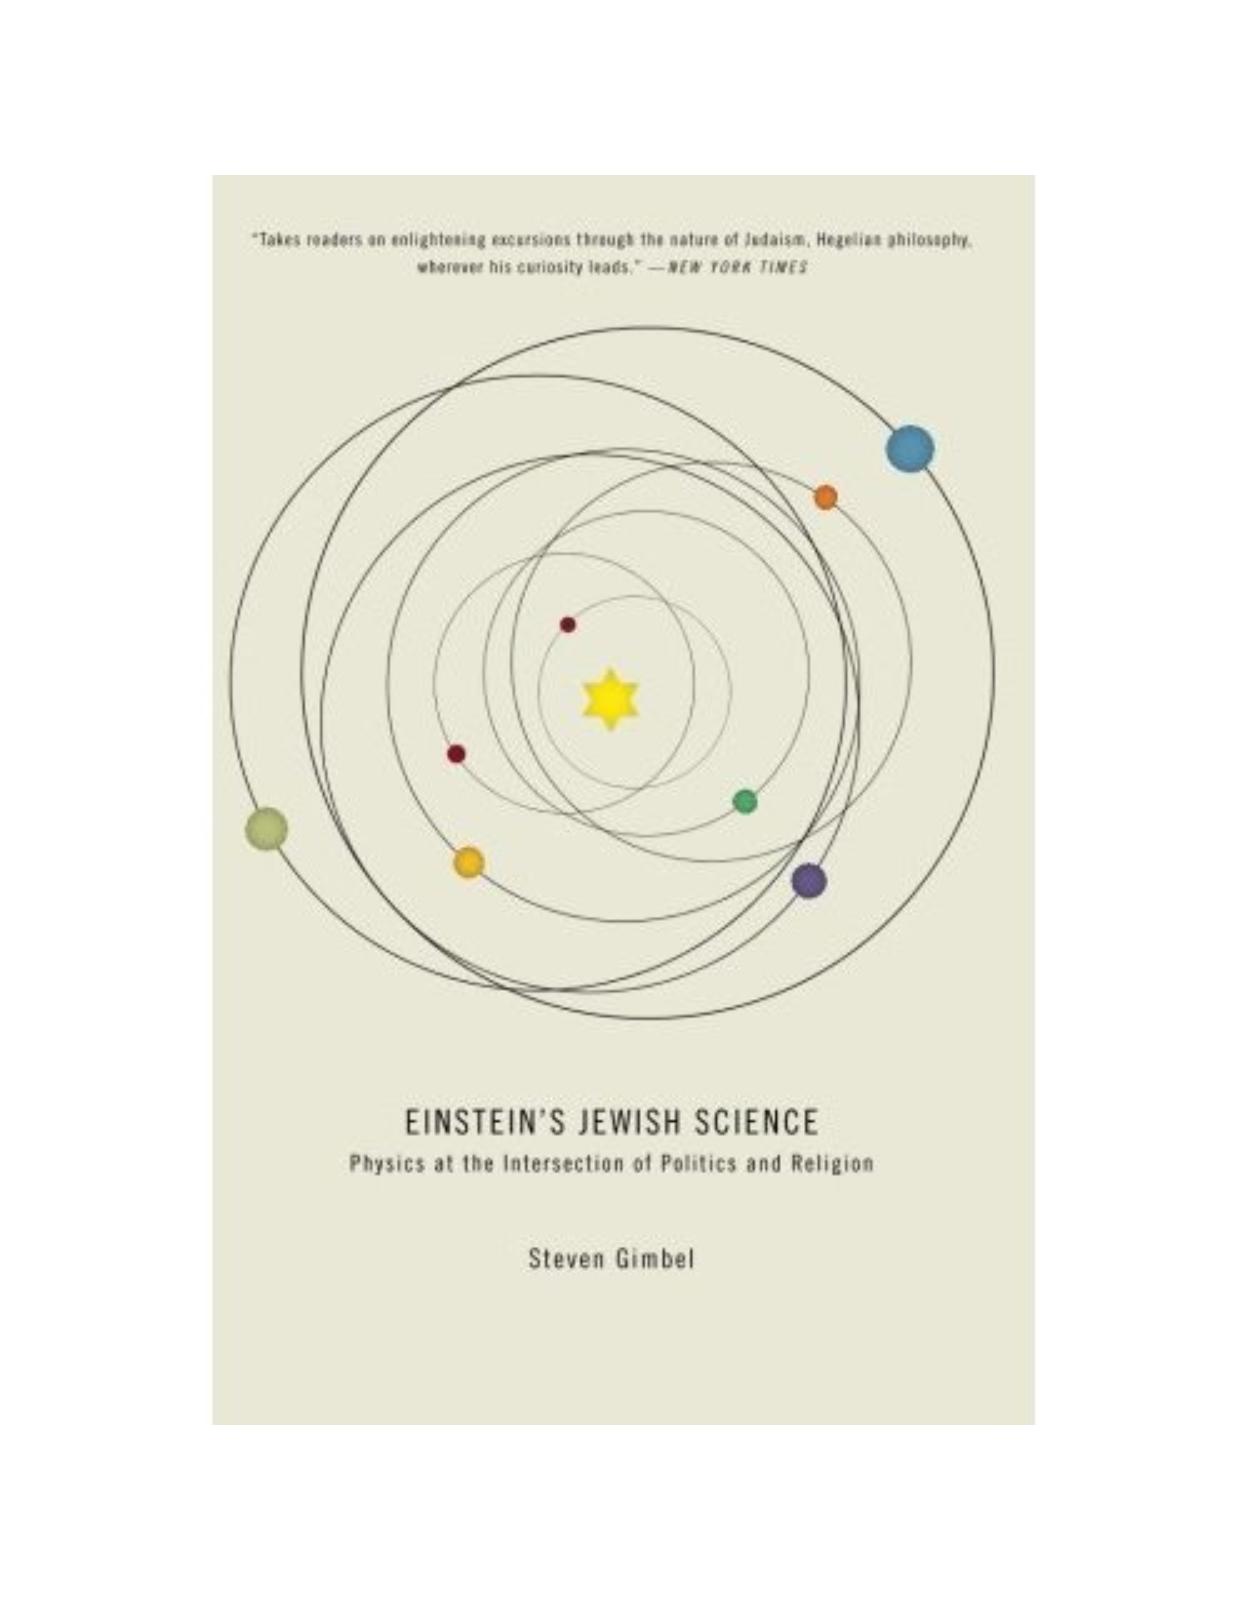 Einstein's Jewish Science. Physics at the Intersection of Politics and Religion